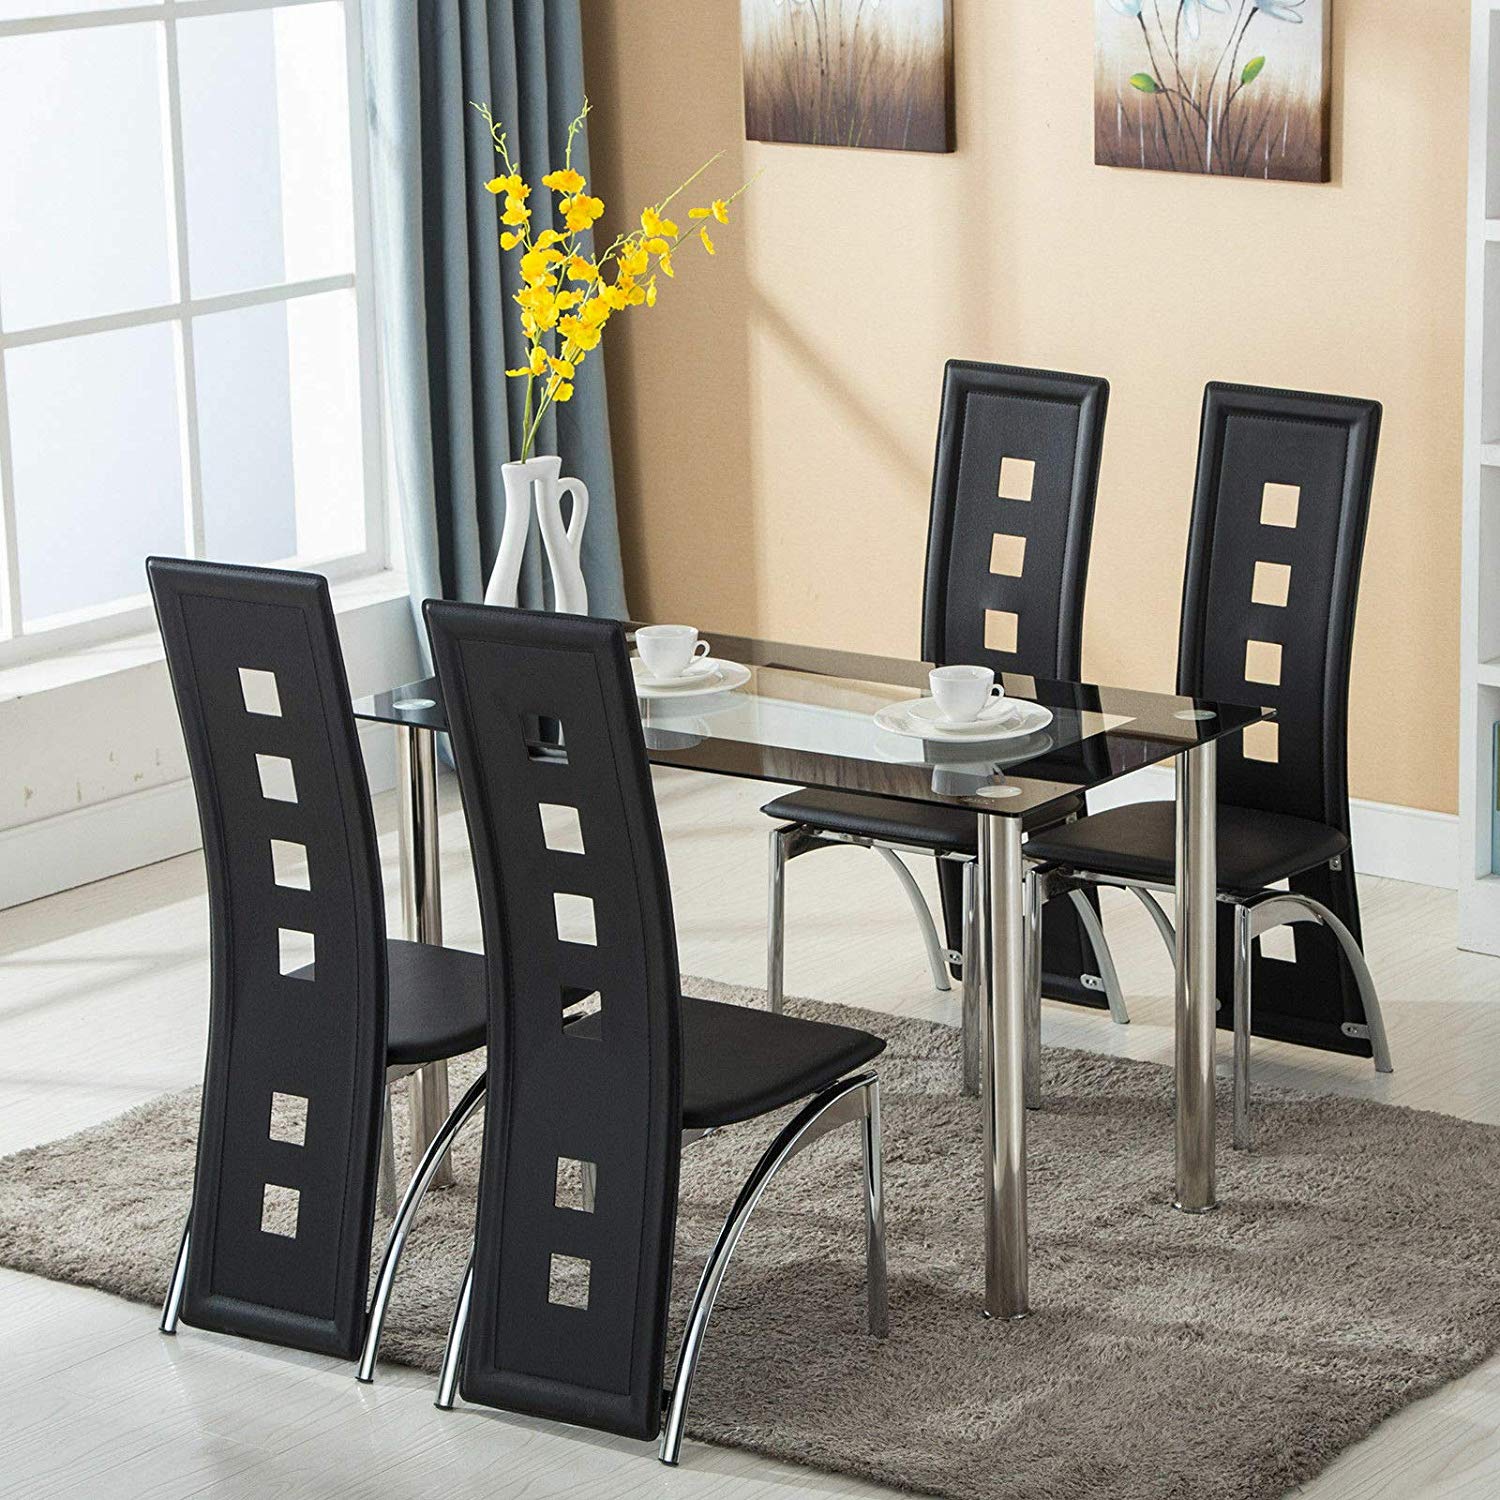 Buy Modern 5 Piece Dining Table Set Tempered Glass Transparent Dining Table With 4pcs Chairs Room Kitchen Breakfast Furniture 110cm Unique Design Home Decorblack Online In Indonesia 615717514